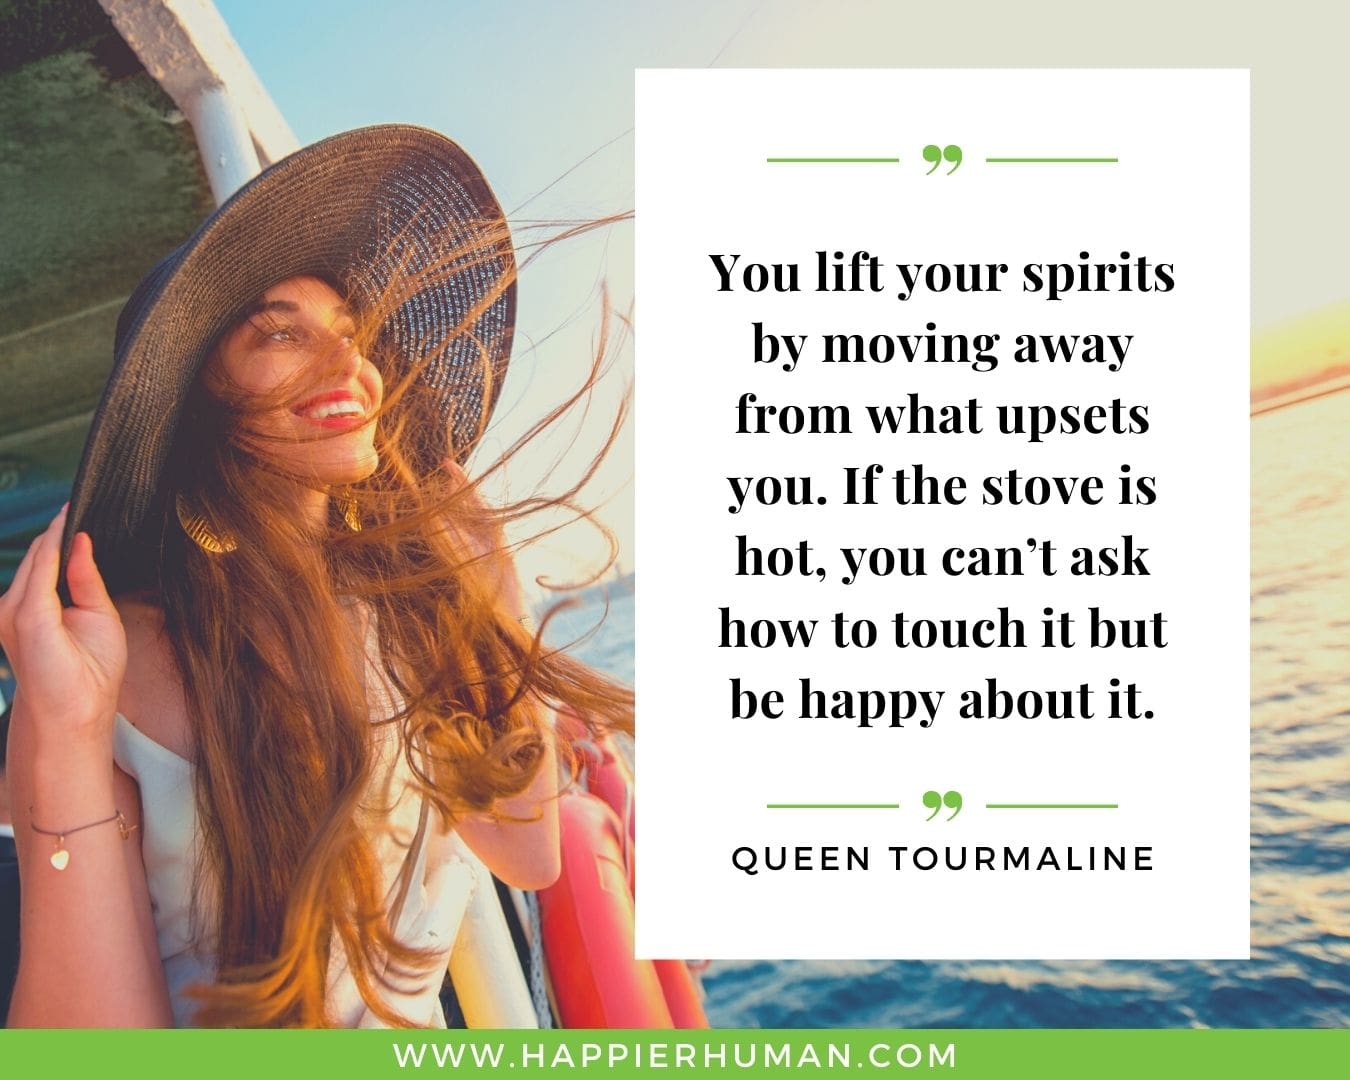 Toxic People Quotes - “You lift your spirits by moving away from what upsets you. If the stove is hot, you can’t ask how to touch it but be happy about it.” – Queen Tourmaline